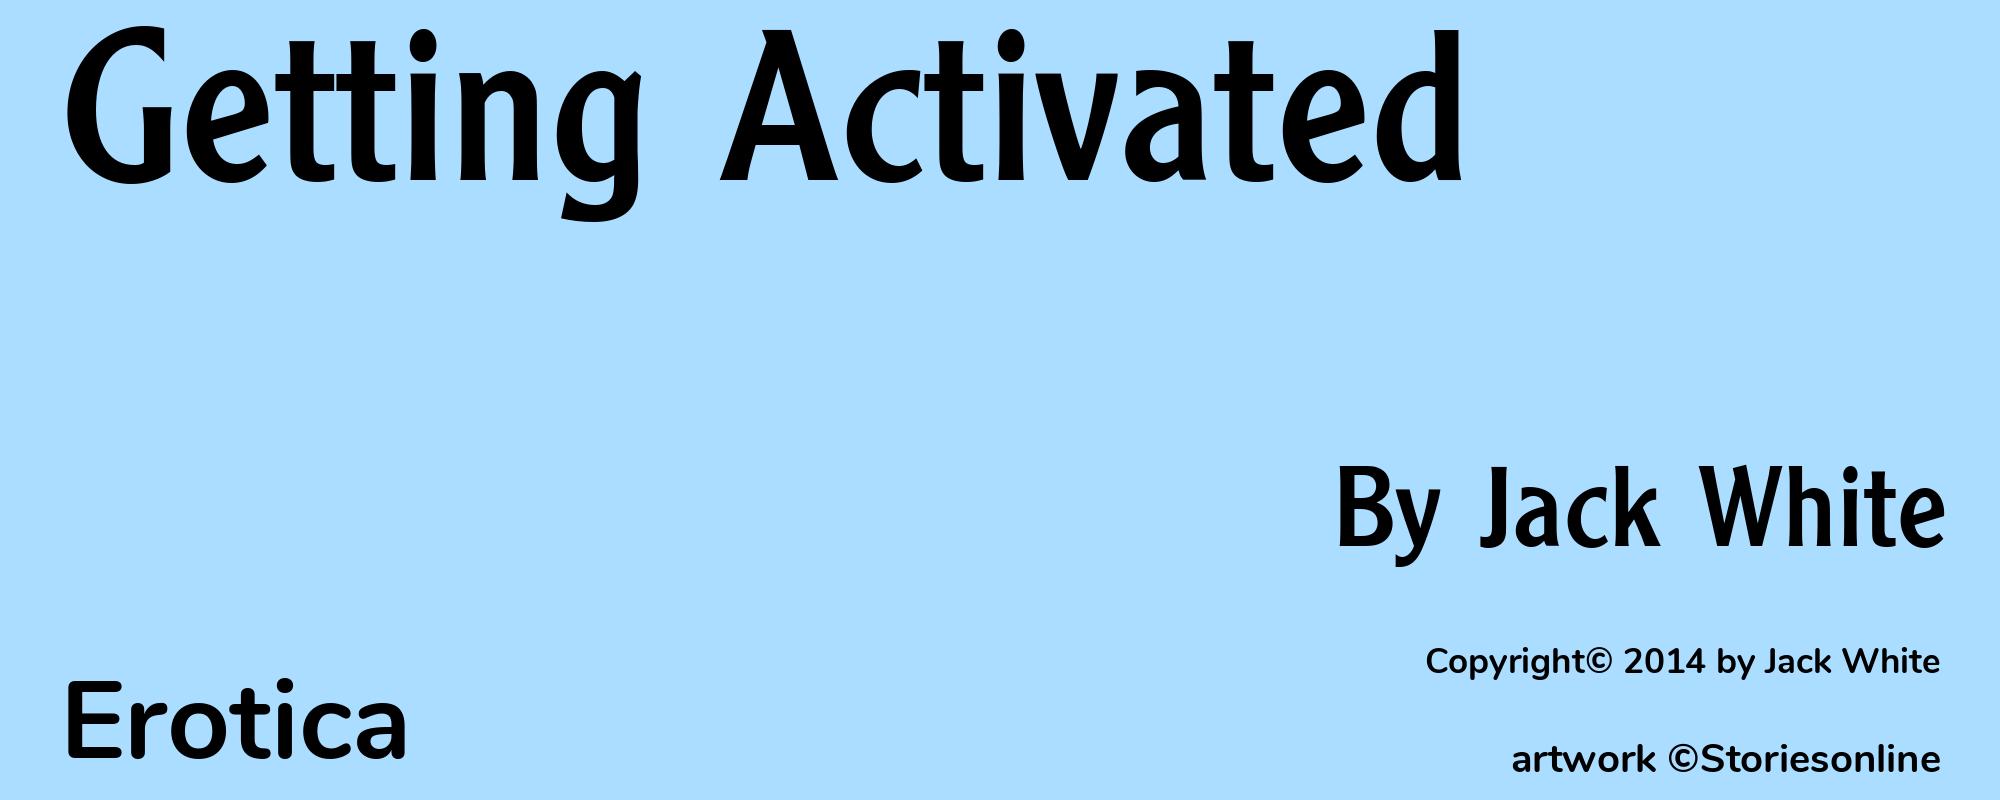 Getting Activated - Cover